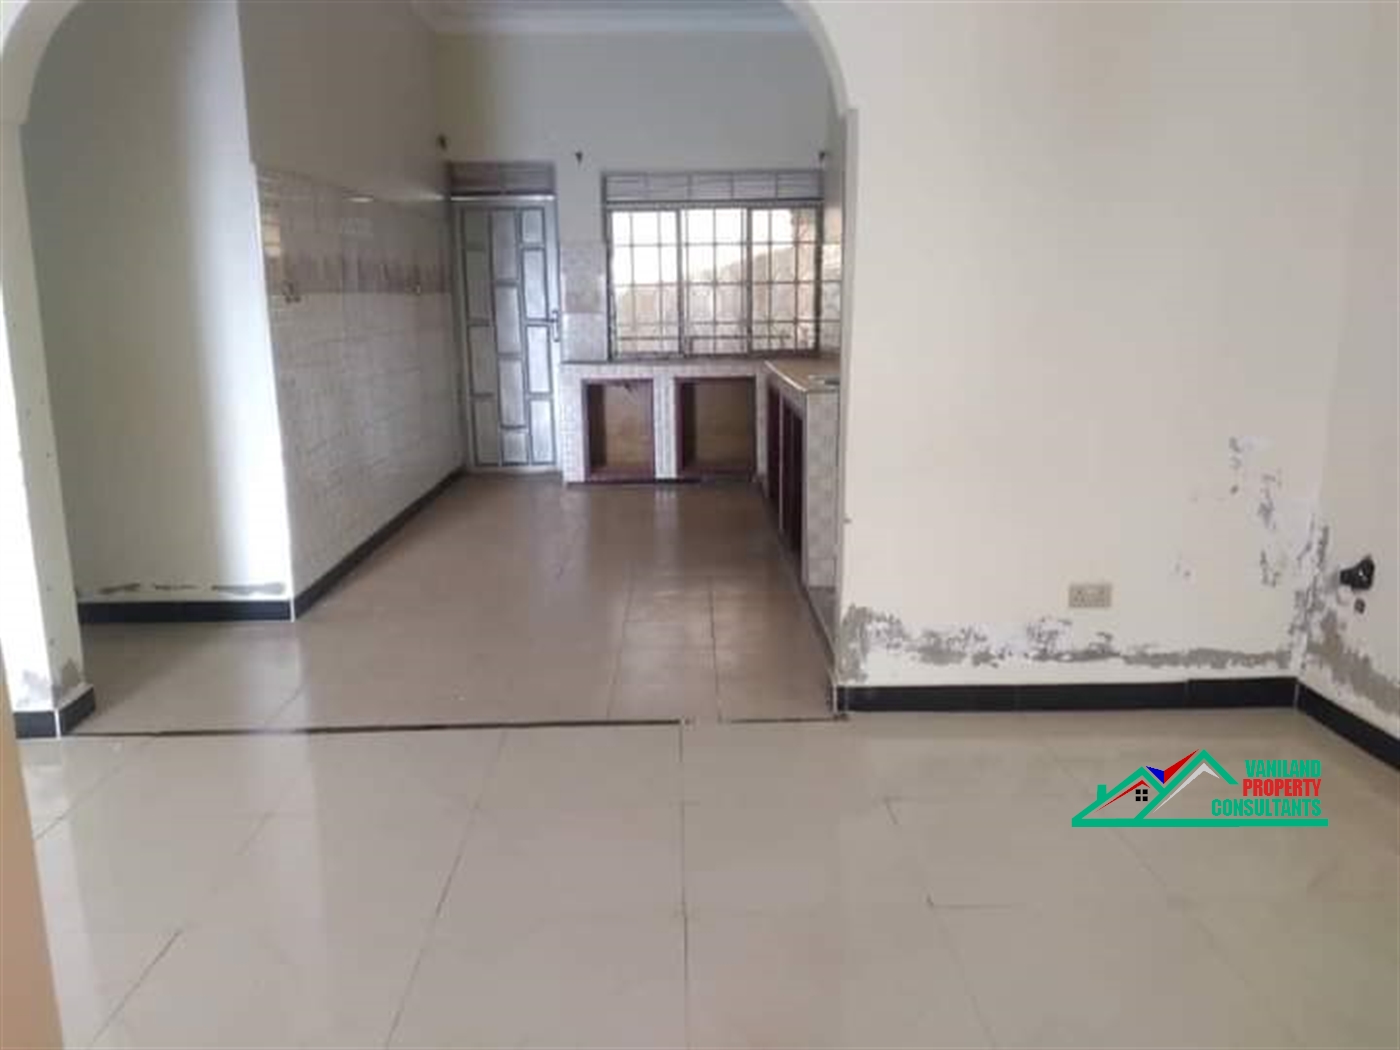 Bungalow for rent in Wakisocentre Wakiso